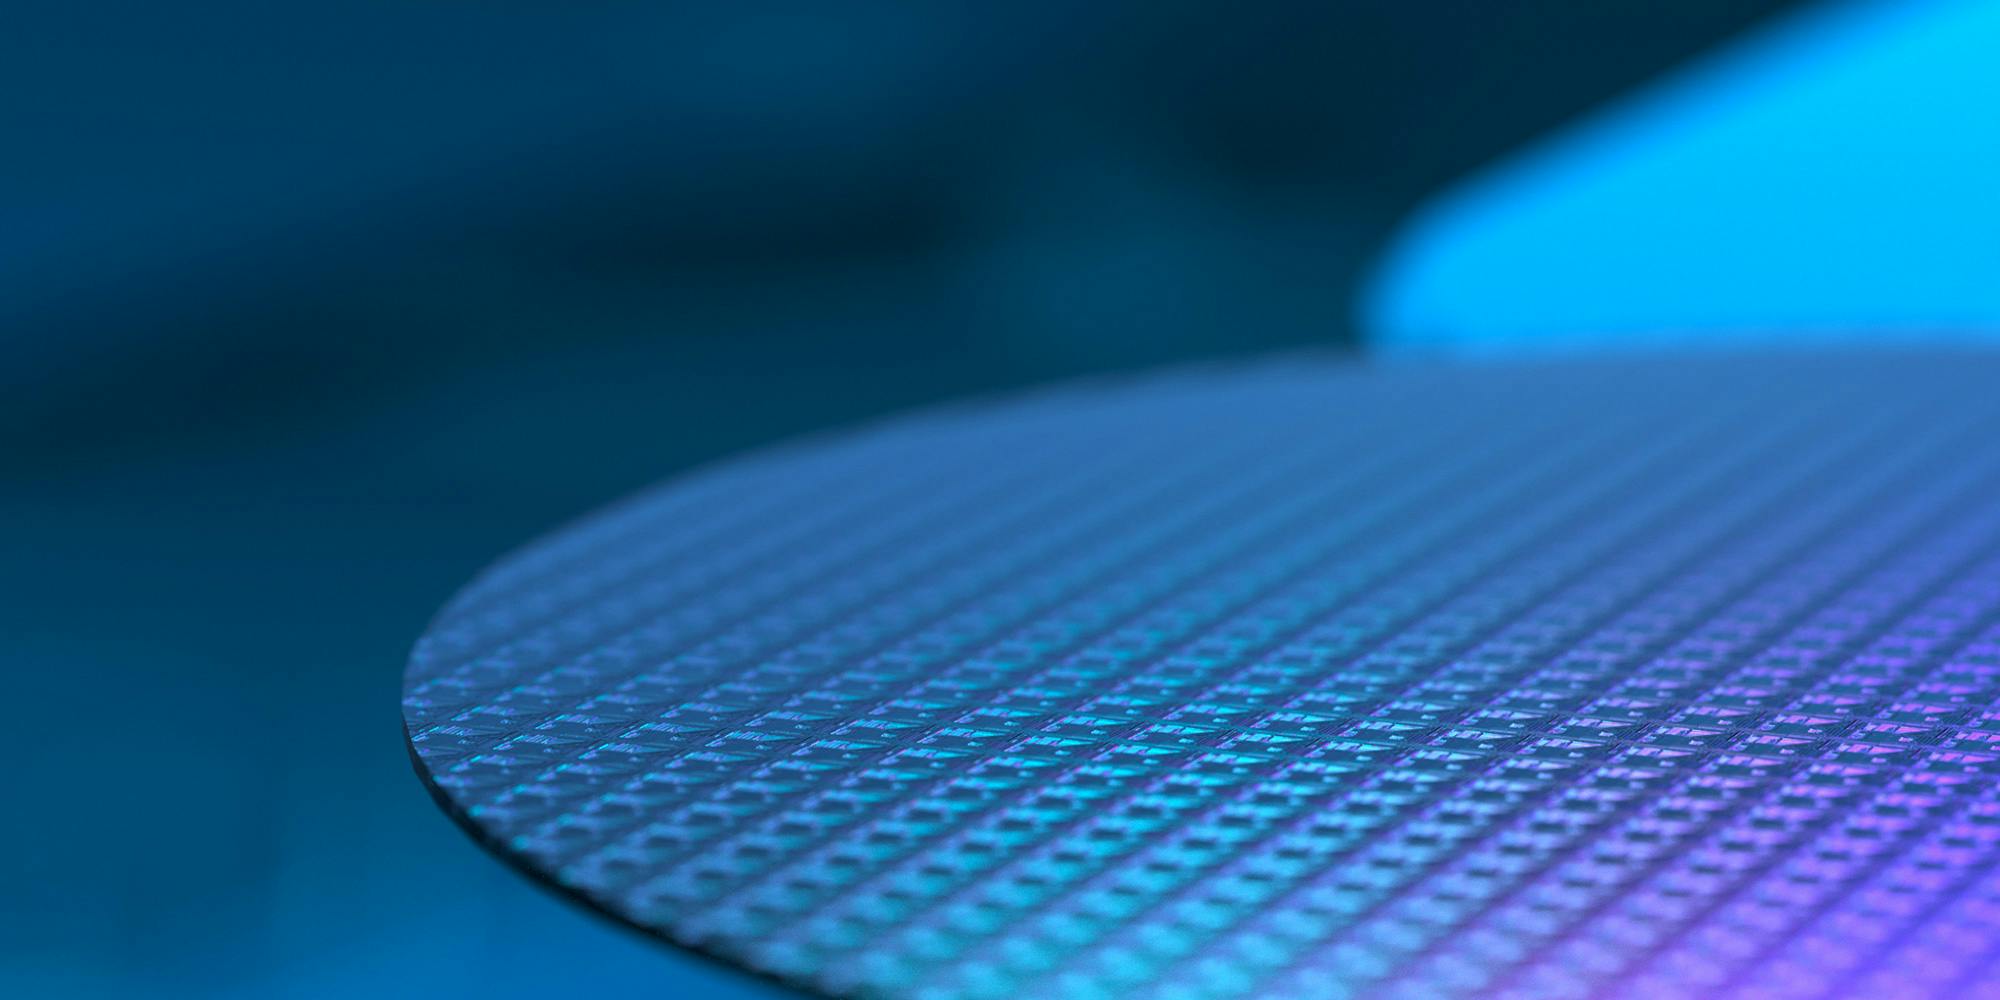 Shaping the semiconductor future together